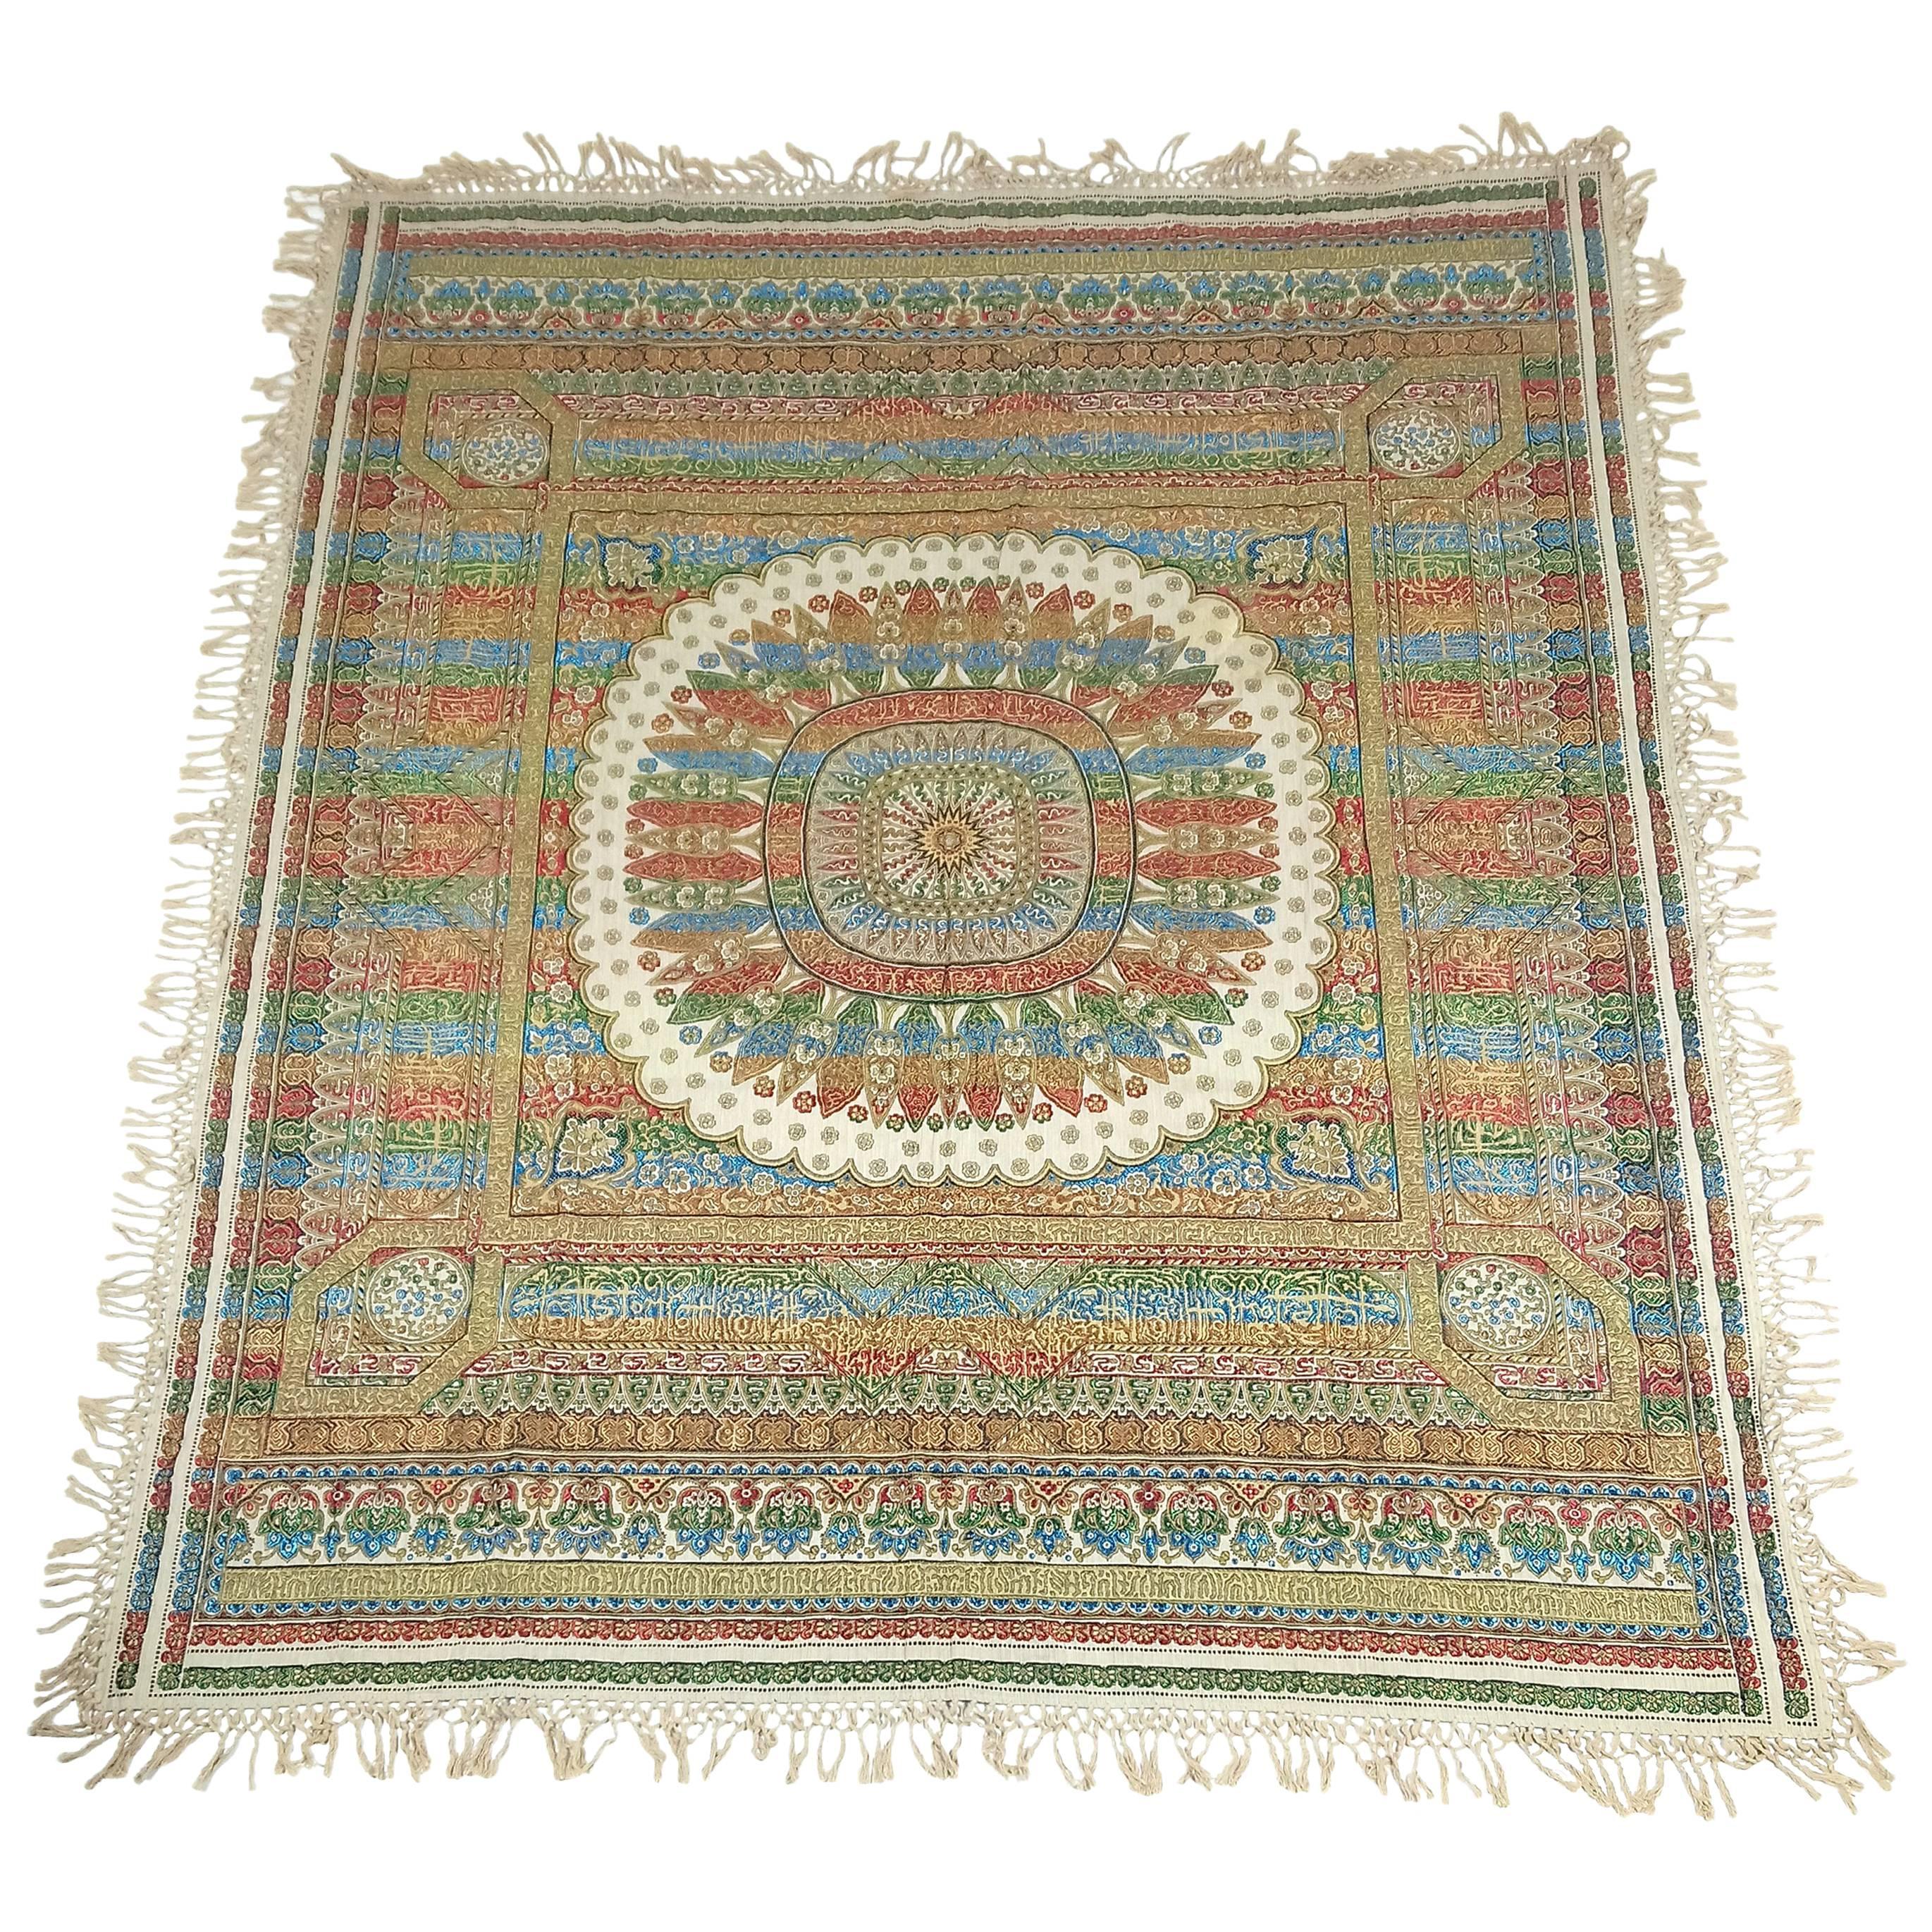 Early 20th Century Indian Worked Silk Wall Hanging or Bed Cover For Sale